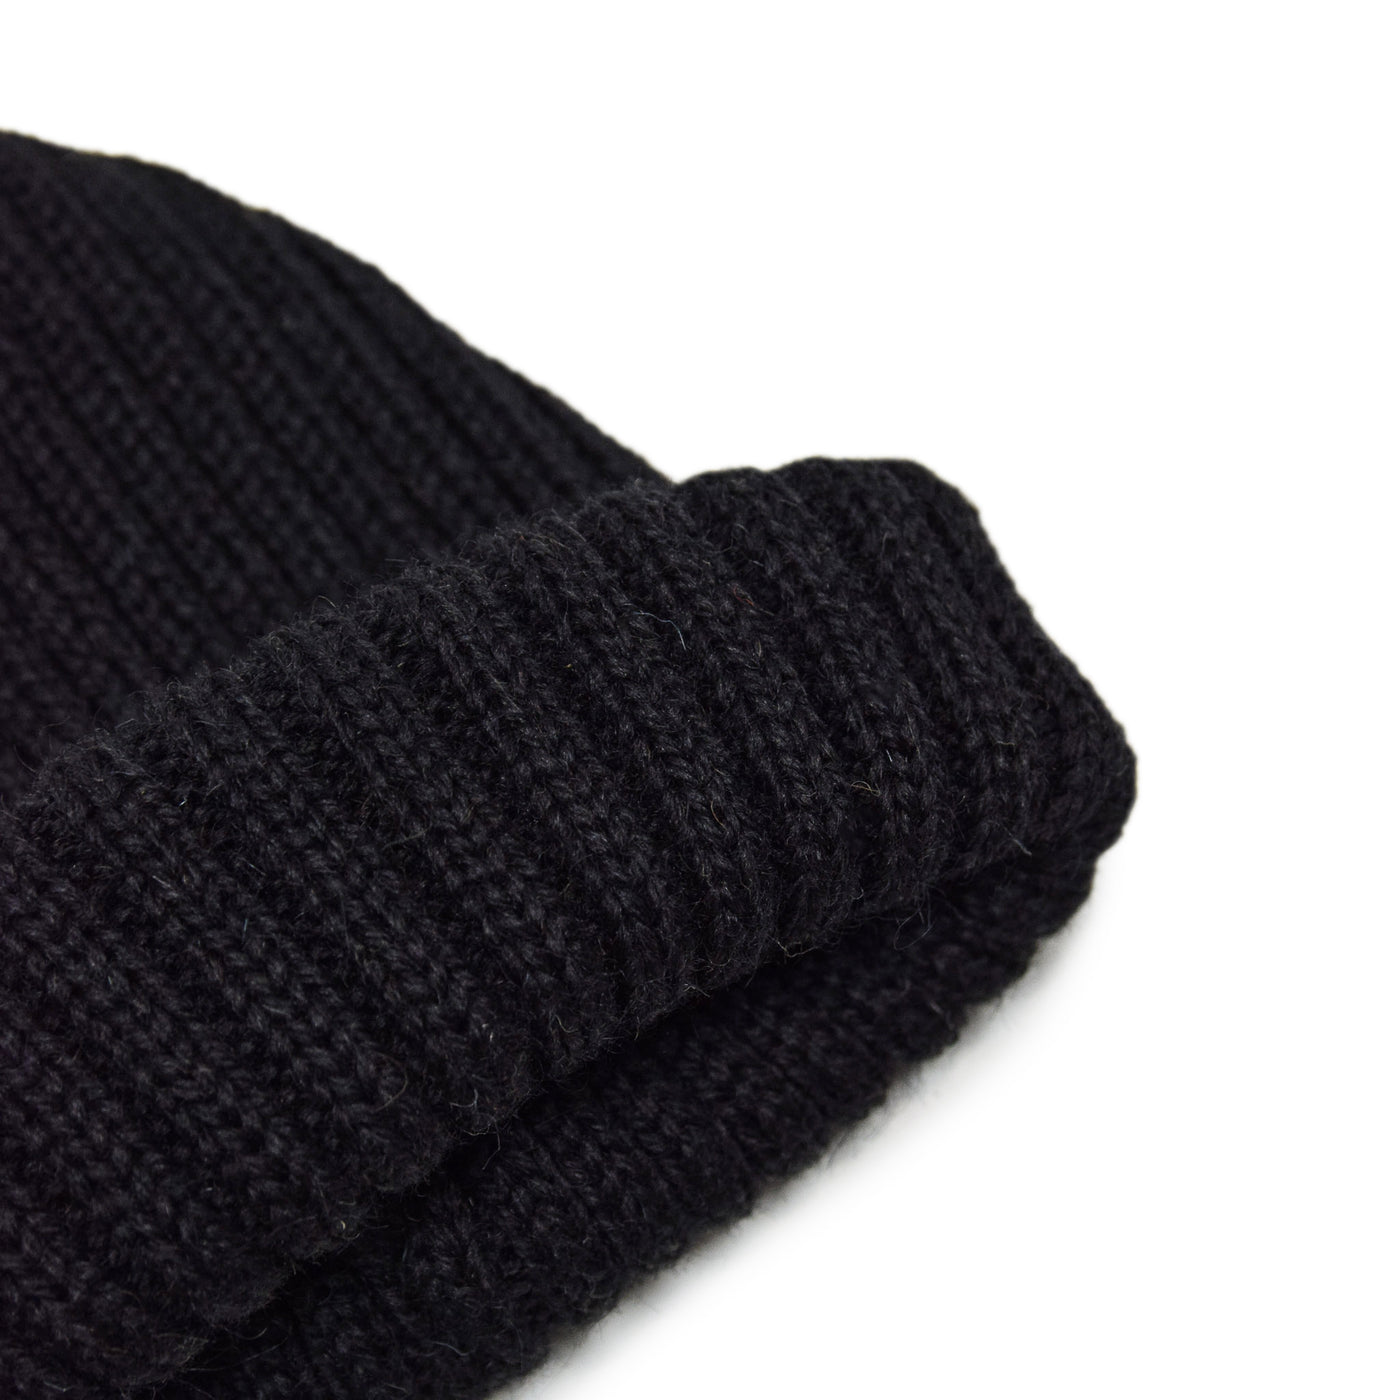 Connor Reilly Wool Watch Cap Black Made In England Wool Detail